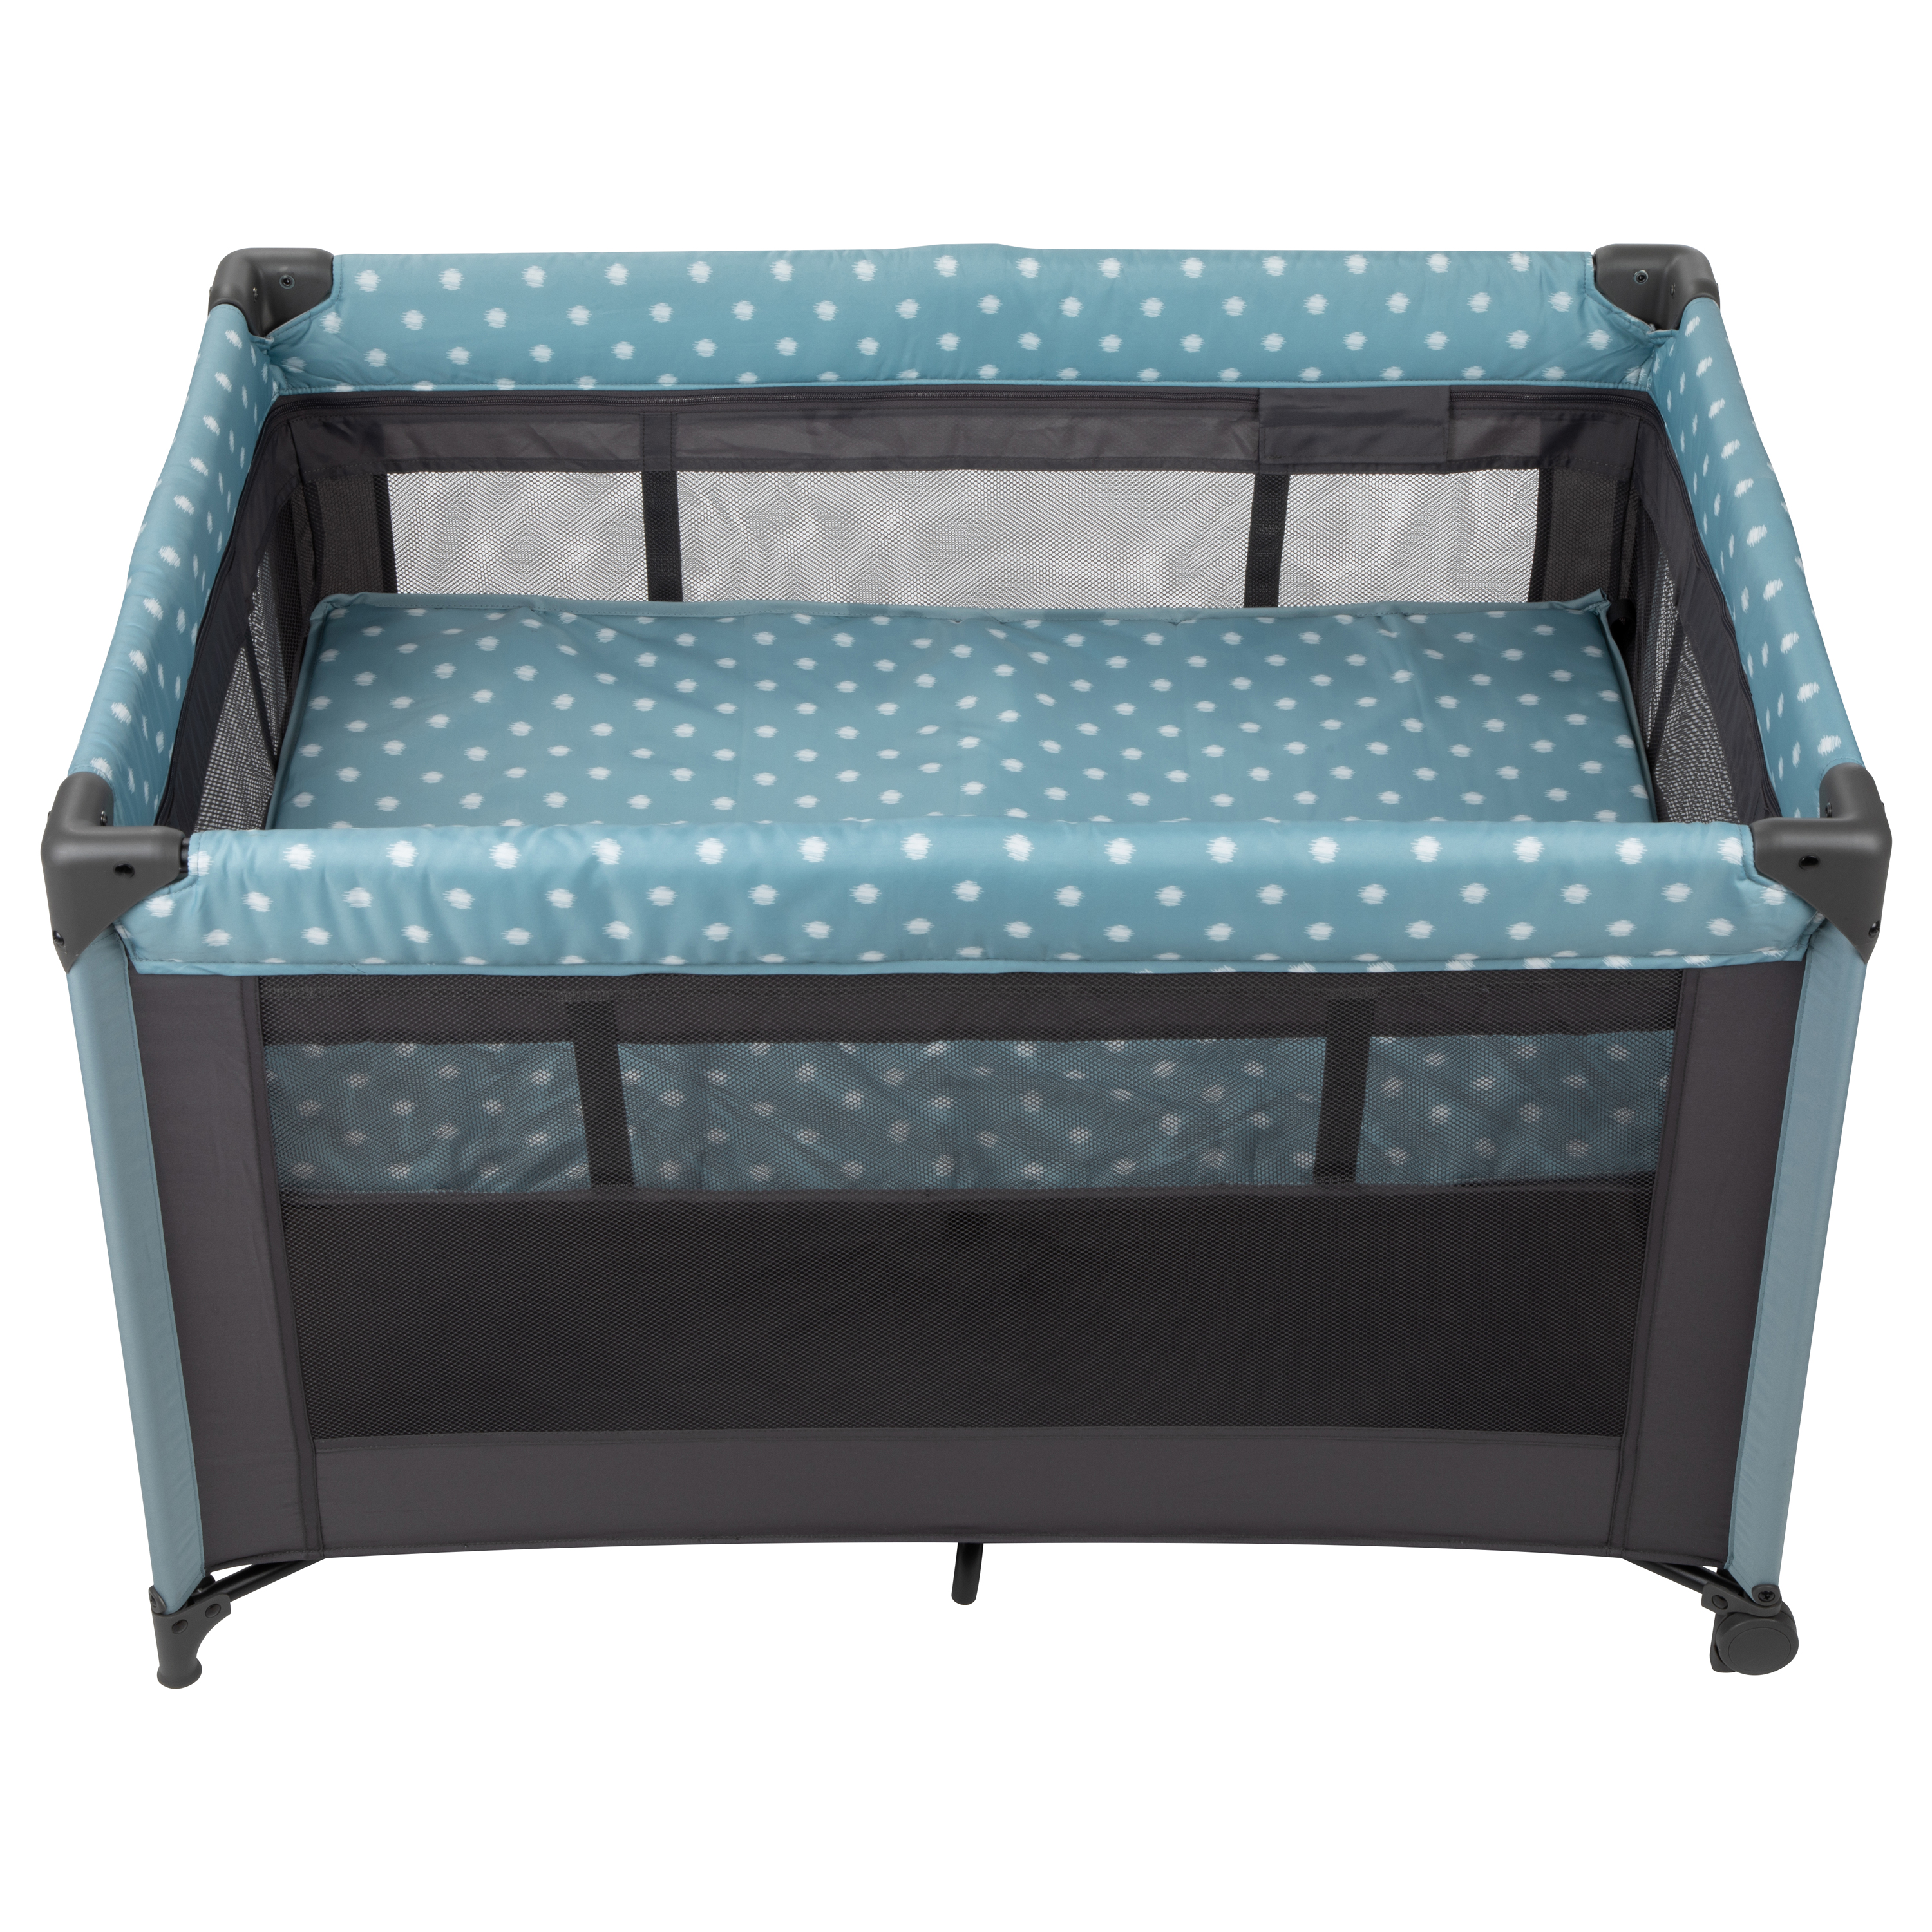 Babideal Dottie Baby Play Yard with Bassinet, Blue Dot - image 3 of 8